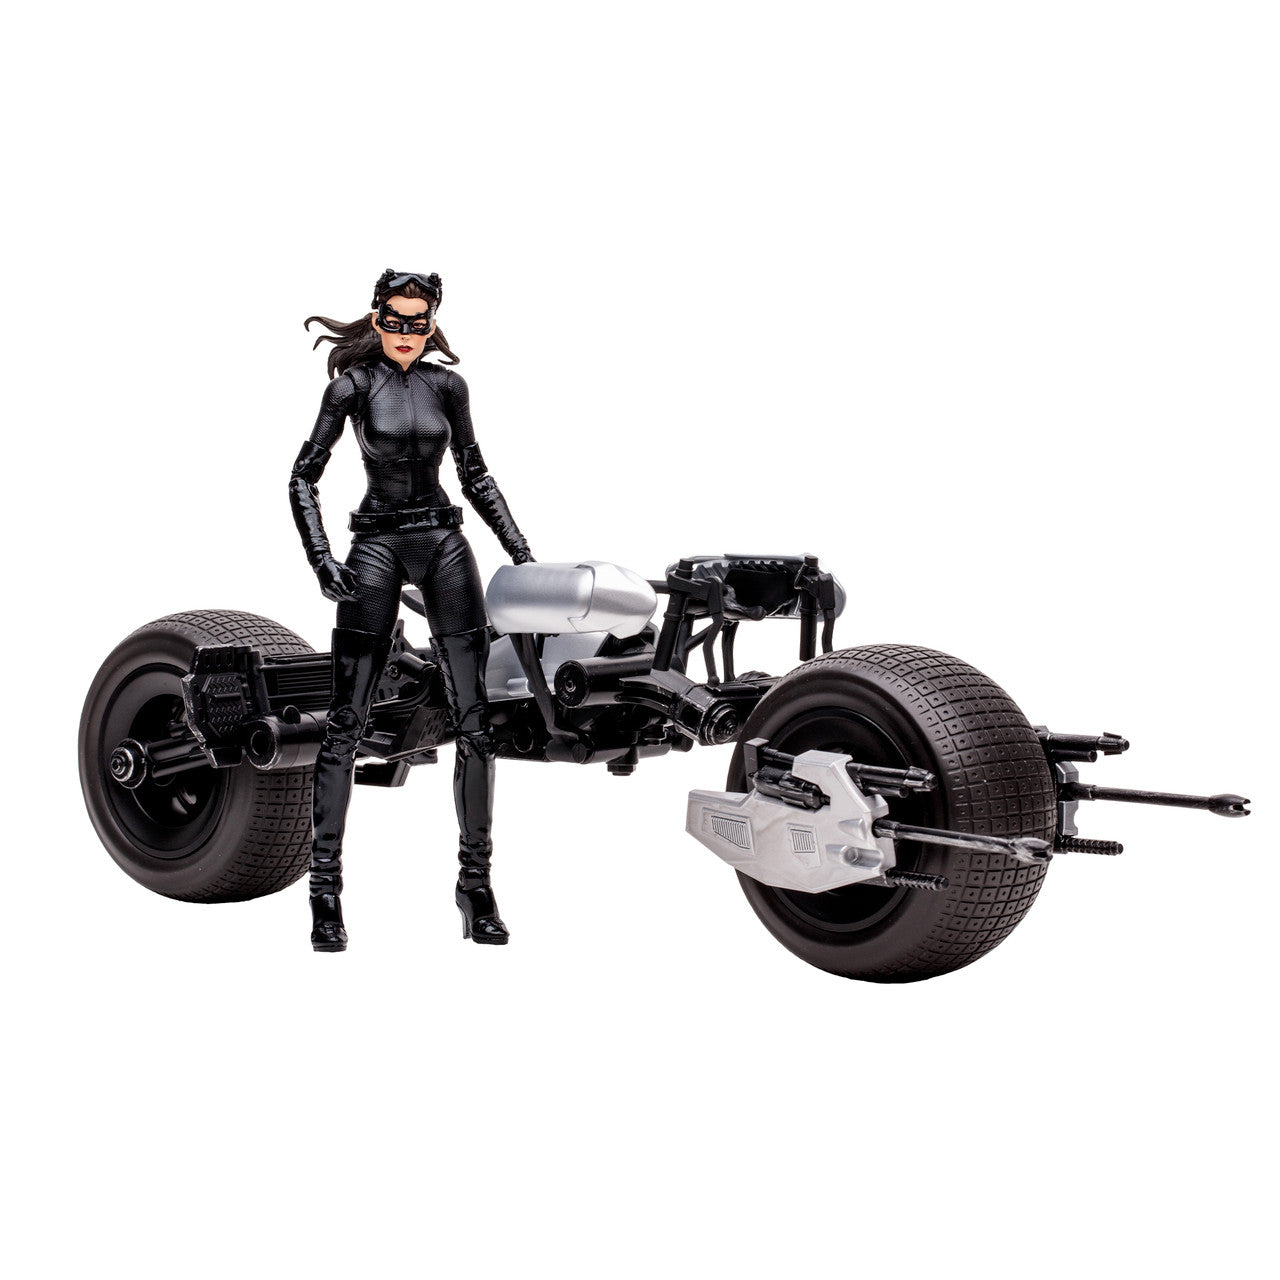 Catwoman and Batpod (The Dark Knight Rises) Exclusive Gold Label 7" Figure and Vehicle